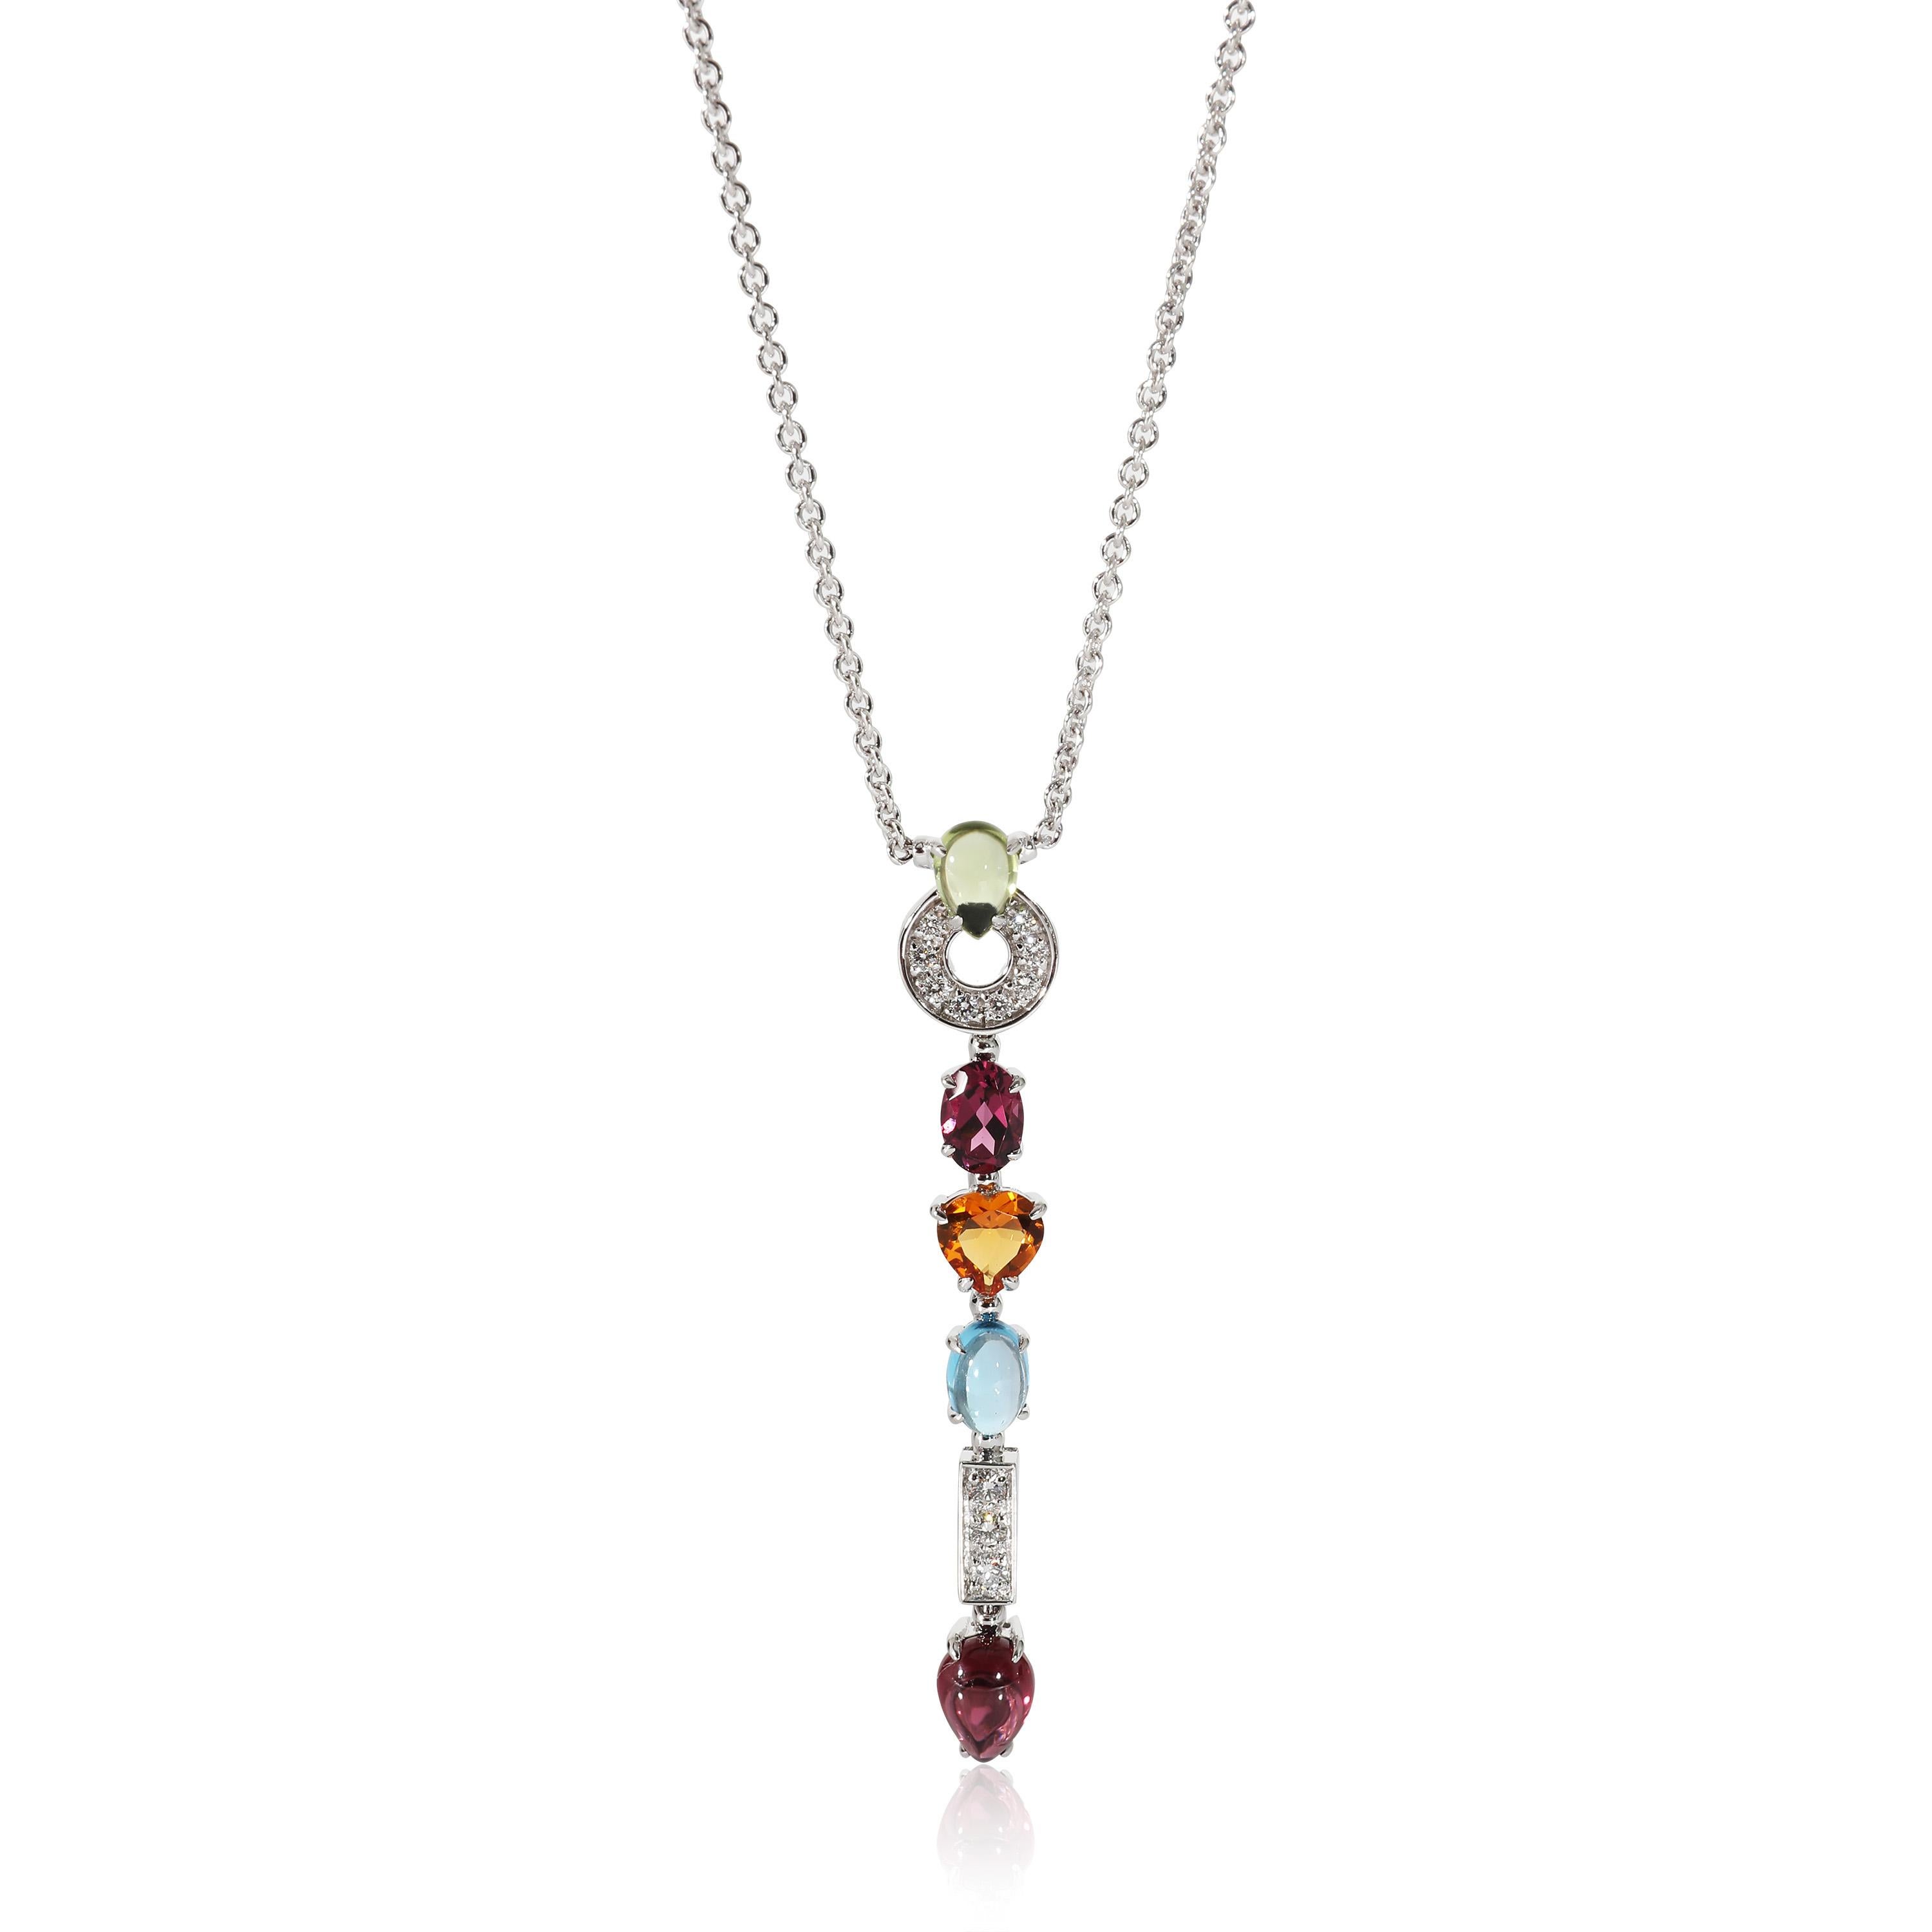 BVLGARI Allegra Diamond & Gemstones Pendant in 18k White Gold 0.3 CTW In Excellent Condition For Sale In New York, NY